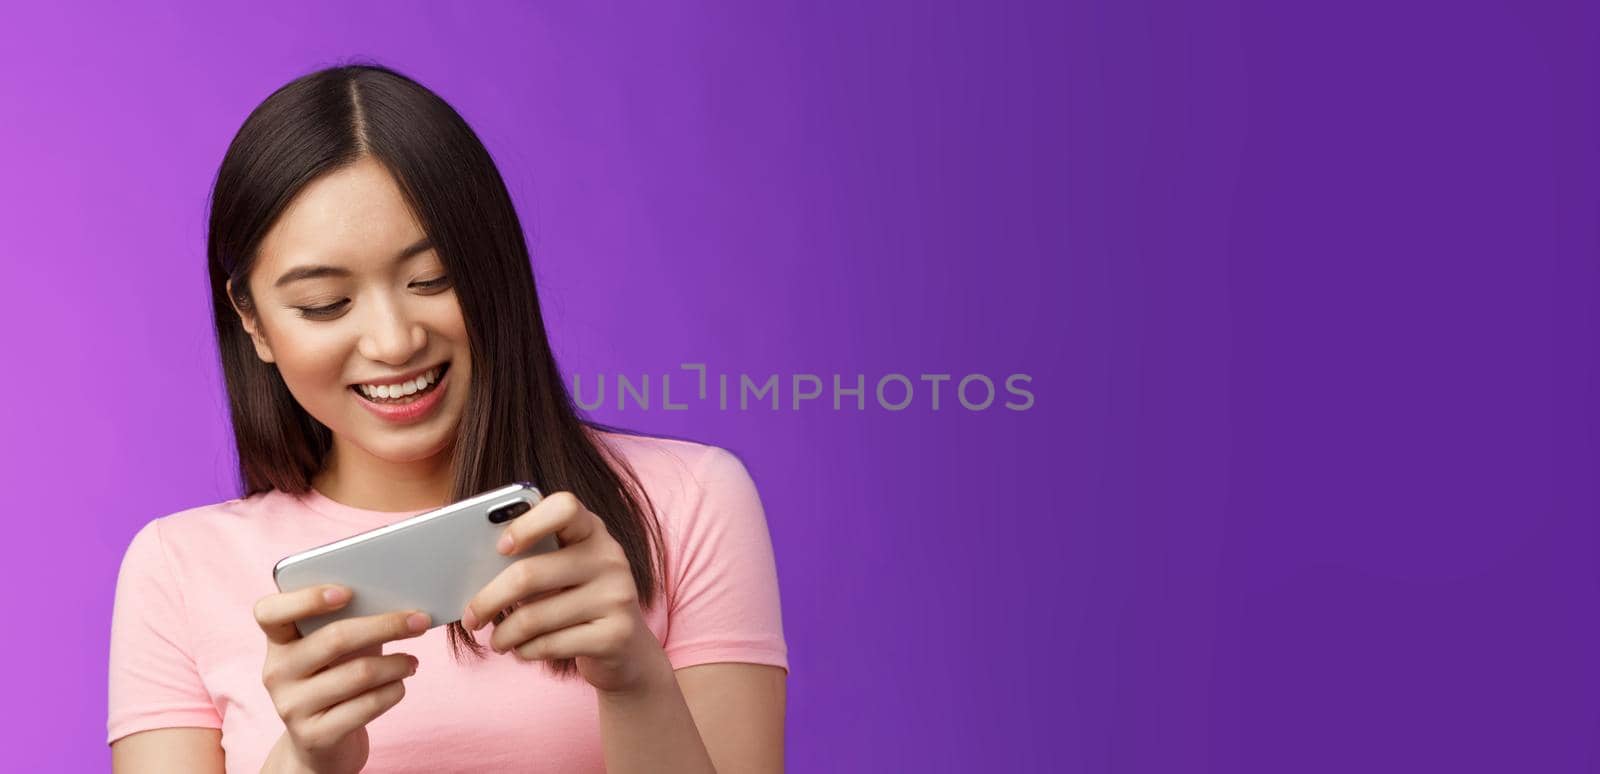 Close-up joyful attractive asian woman brunette having fun spend time playing smartphone game, laughing smiling eager win race, hold phone horizontal beating score, purple background.